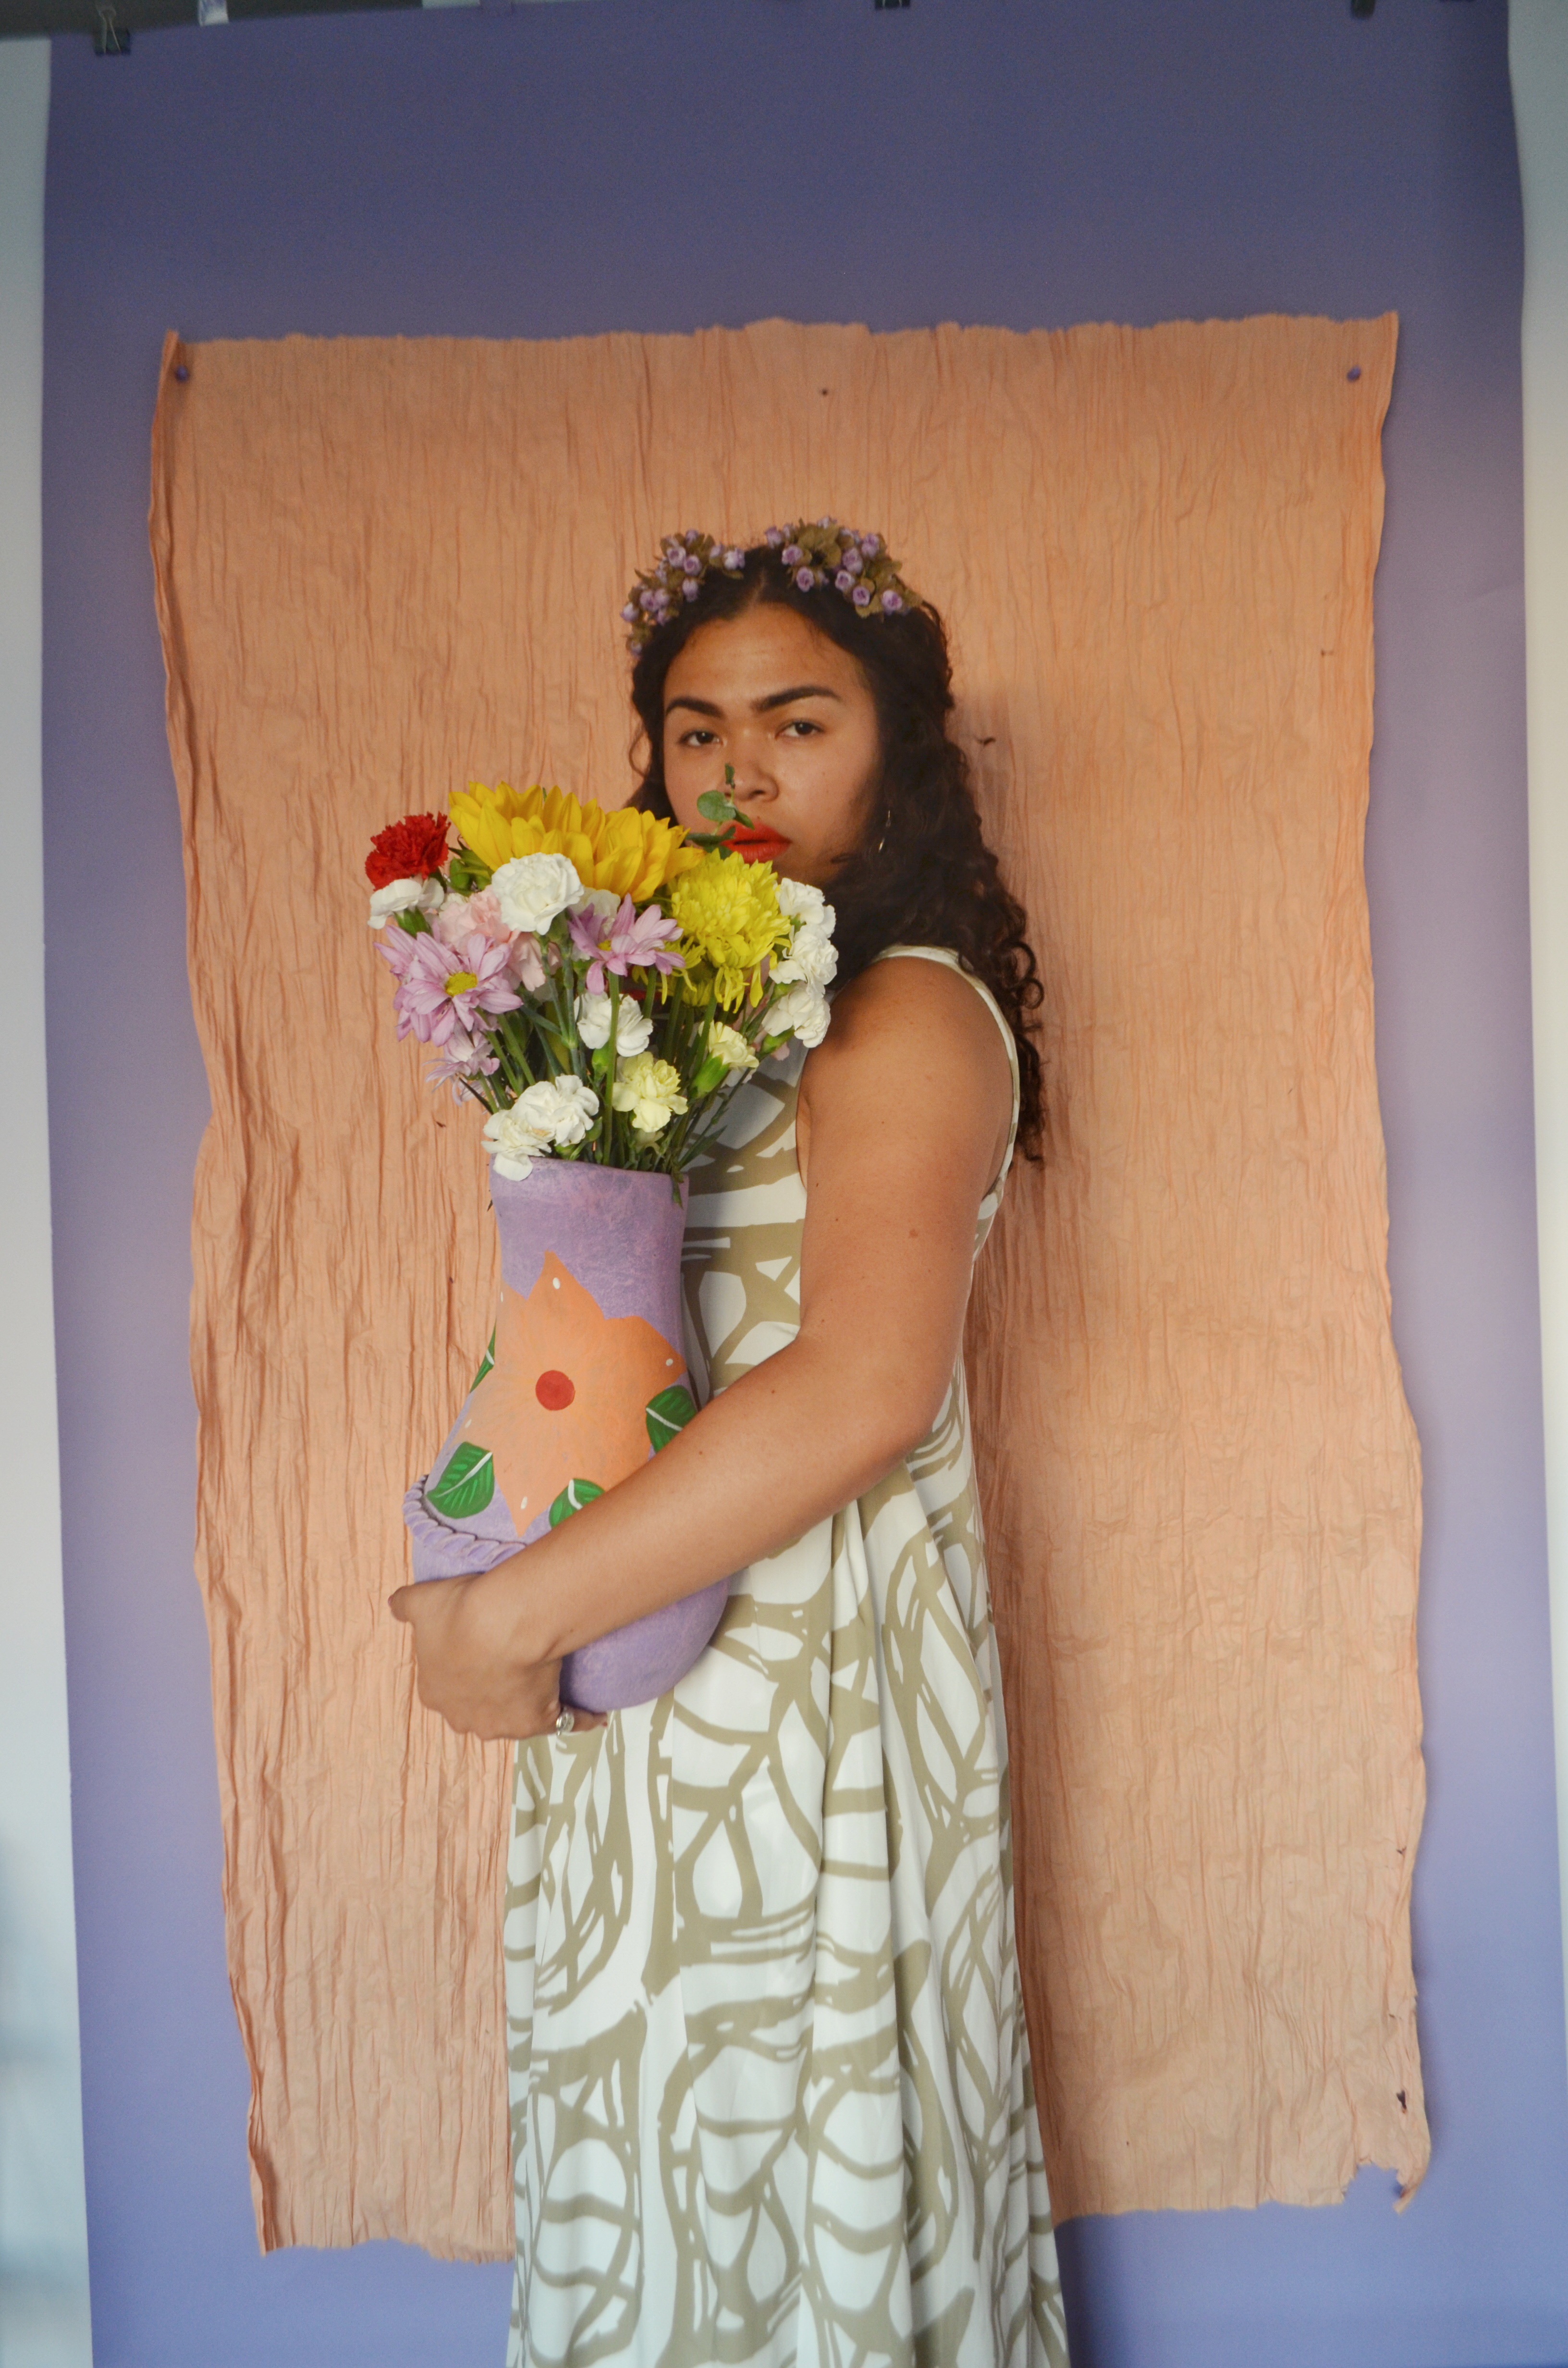 Frida: Digging Deeper - A Portrait Series by Lala Lopez